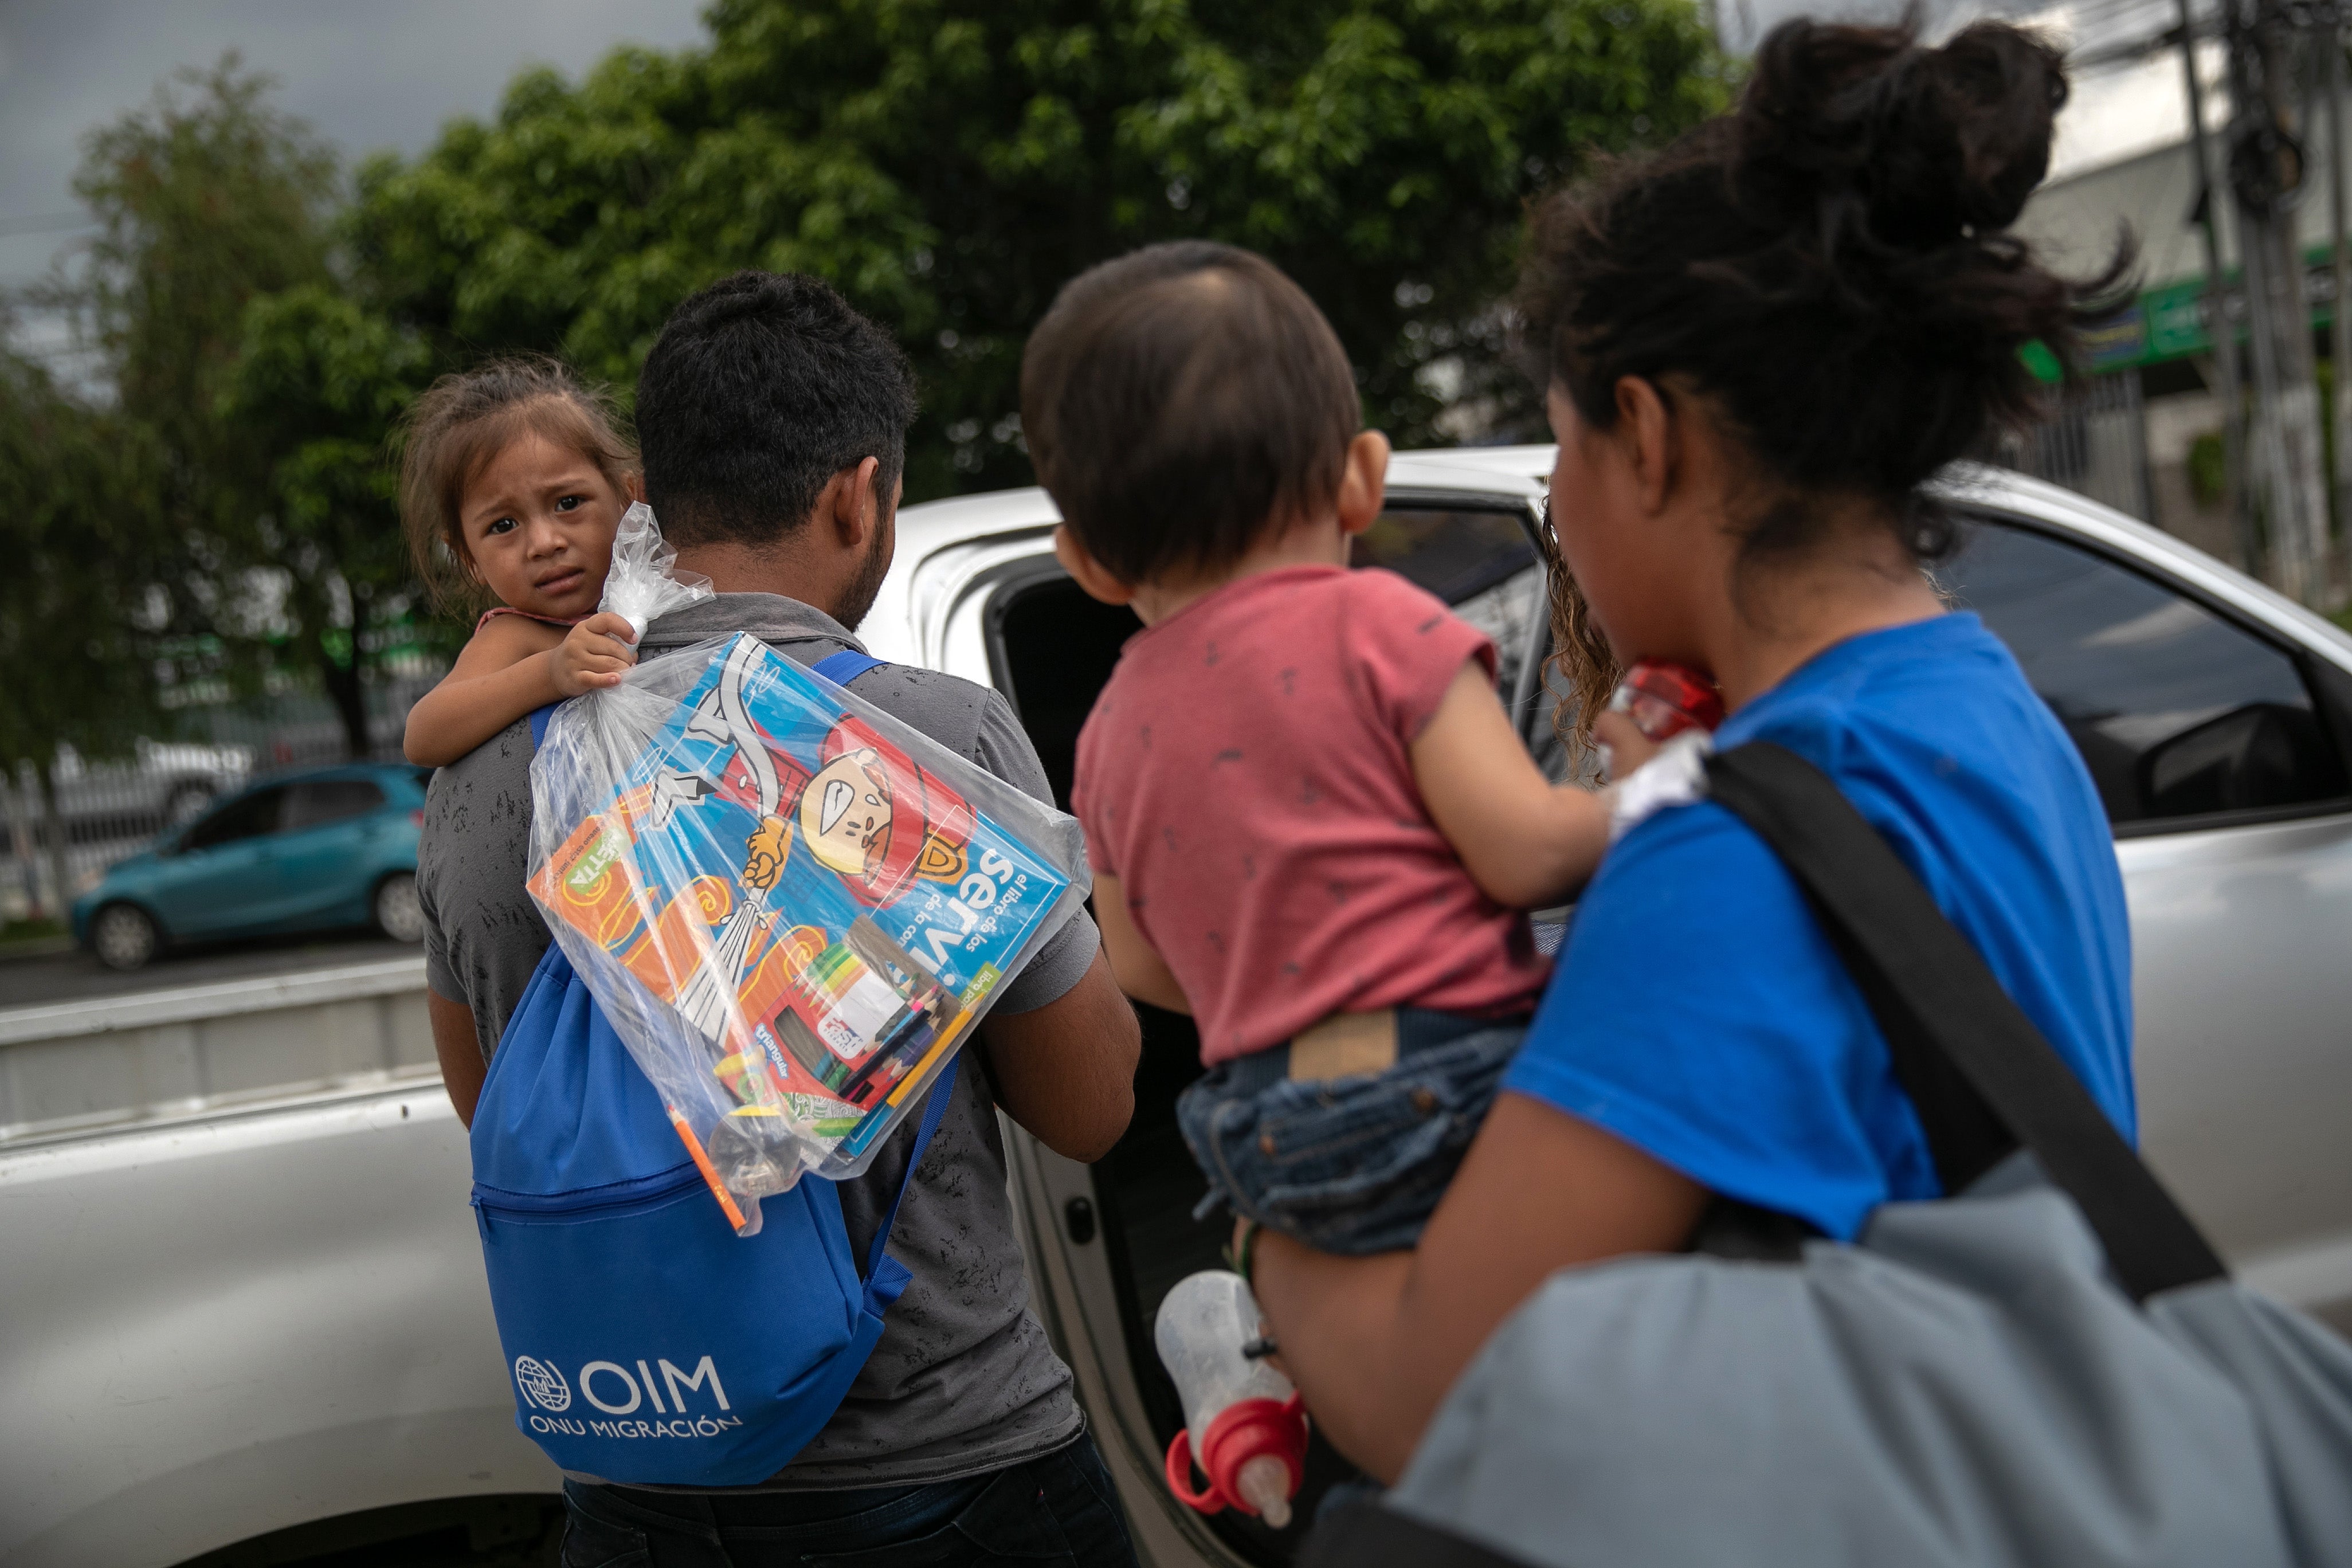 Families depart the airport after arriving on an ICE deportation flight from the US on 22 August, 2019 in Guatemala City, Guatemala. The Biden administration could see thousands of deportation decisions made under the Trump administration reversed.